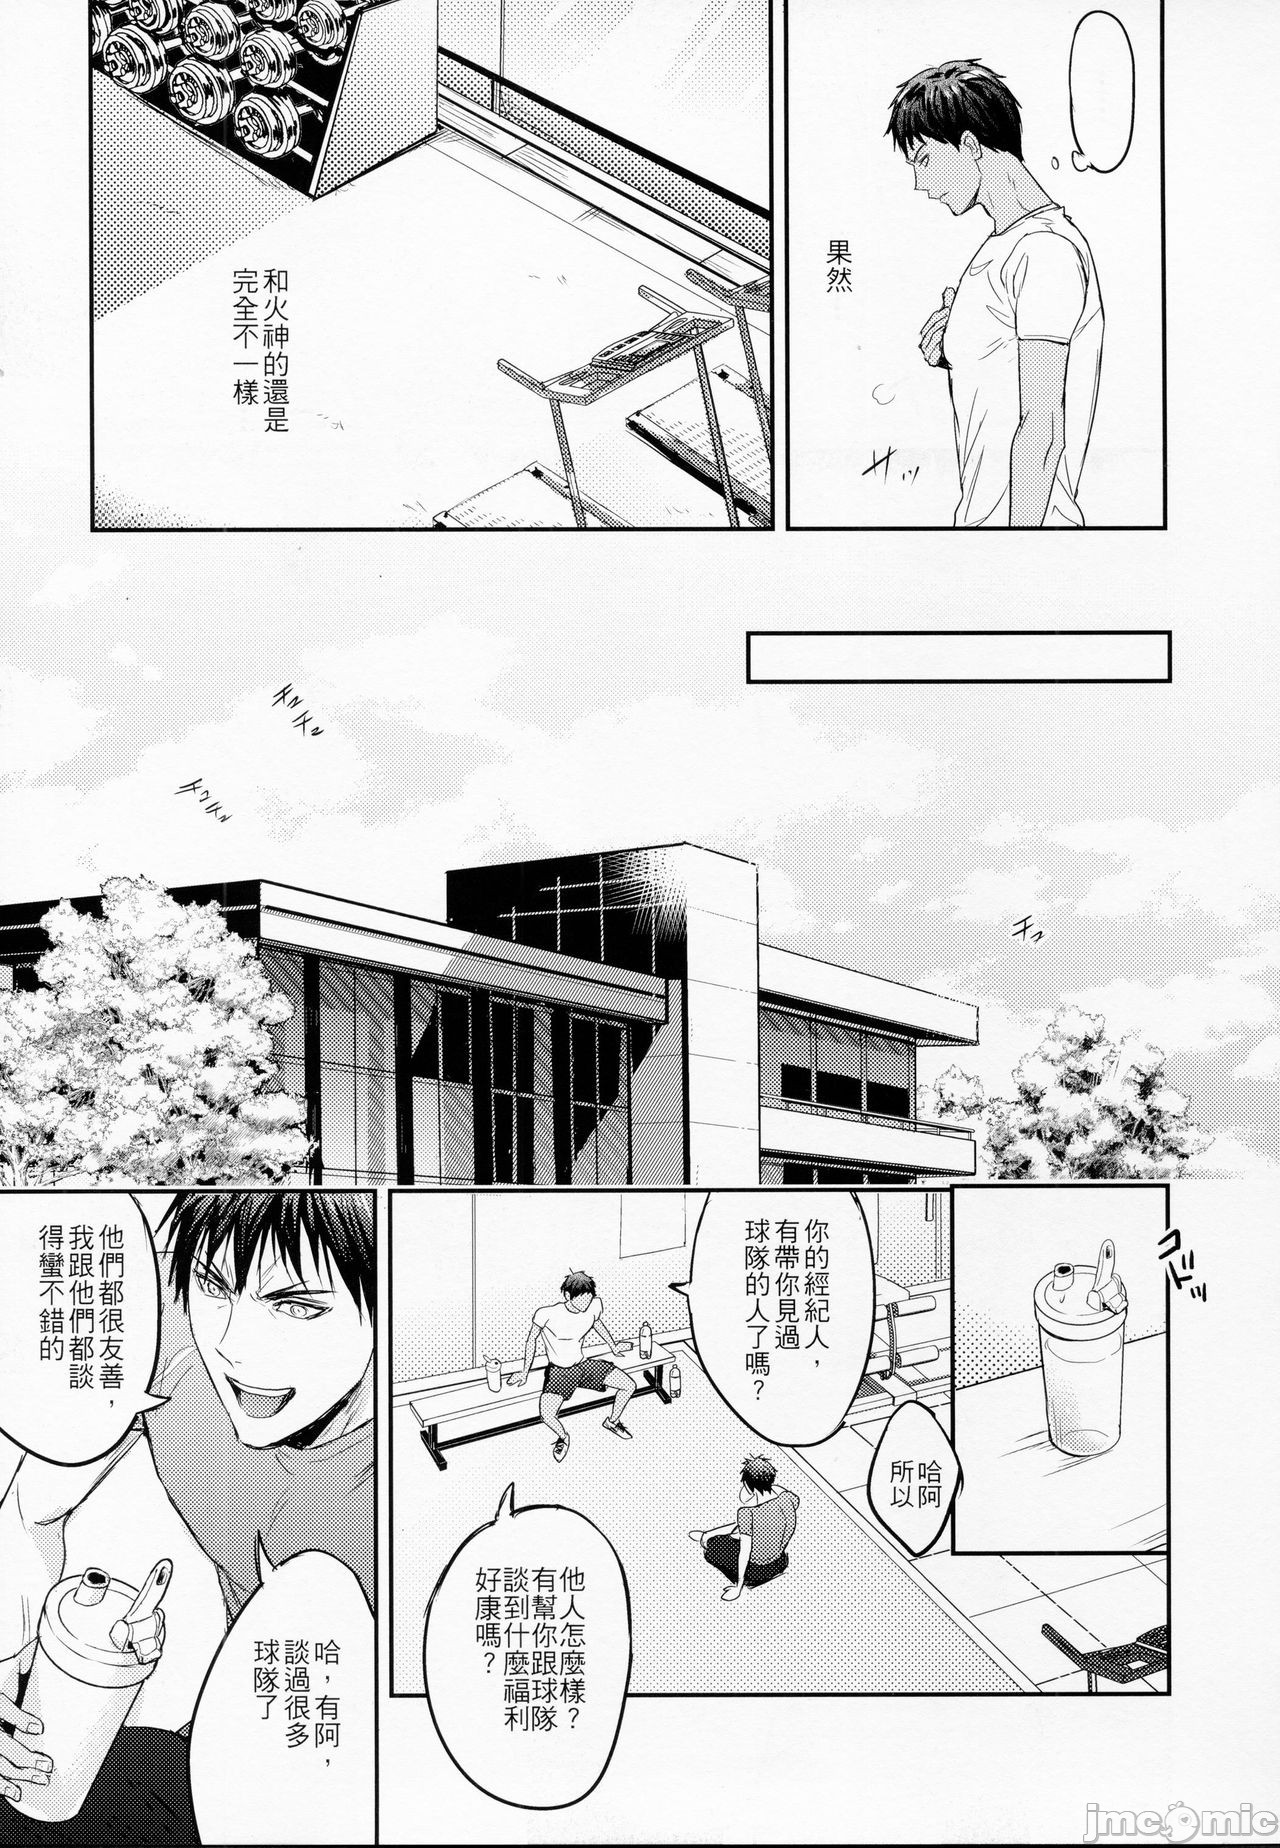 【This is how we WORK IT OUT (黒子のバスケ)[耽美]】漫画-（第1话）章节漫画下拉式图片-6.jpg